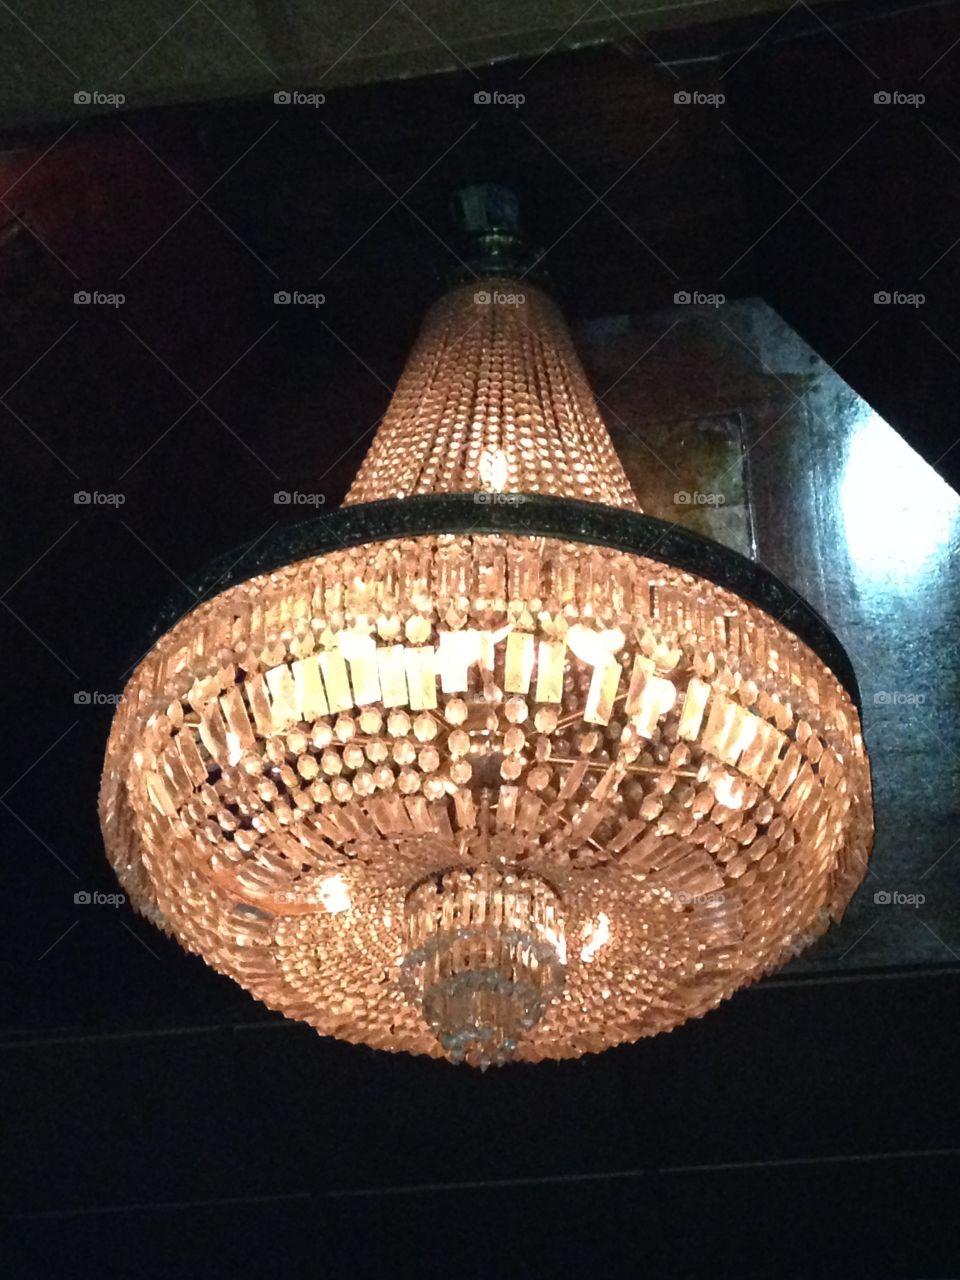 Chandelier. I was at a bar/lounge in Brooklyn and this very cool chandelier caught my eye.